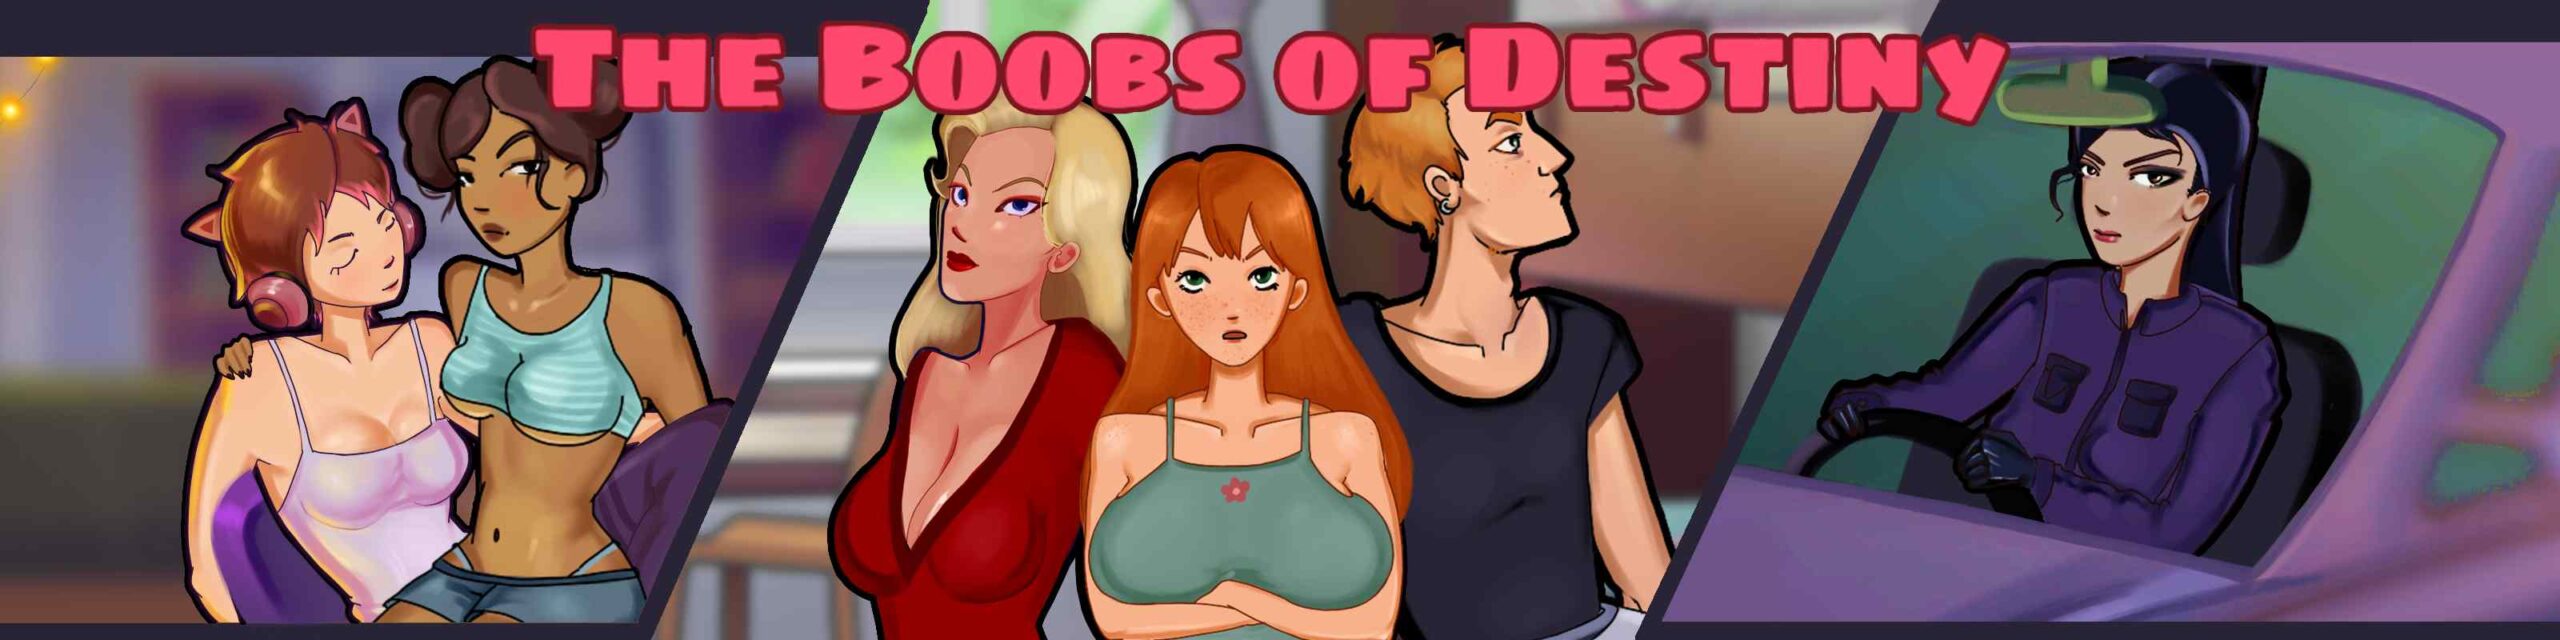 The Boobs of Destiny [SilentGoose] Adult xxx Game Download